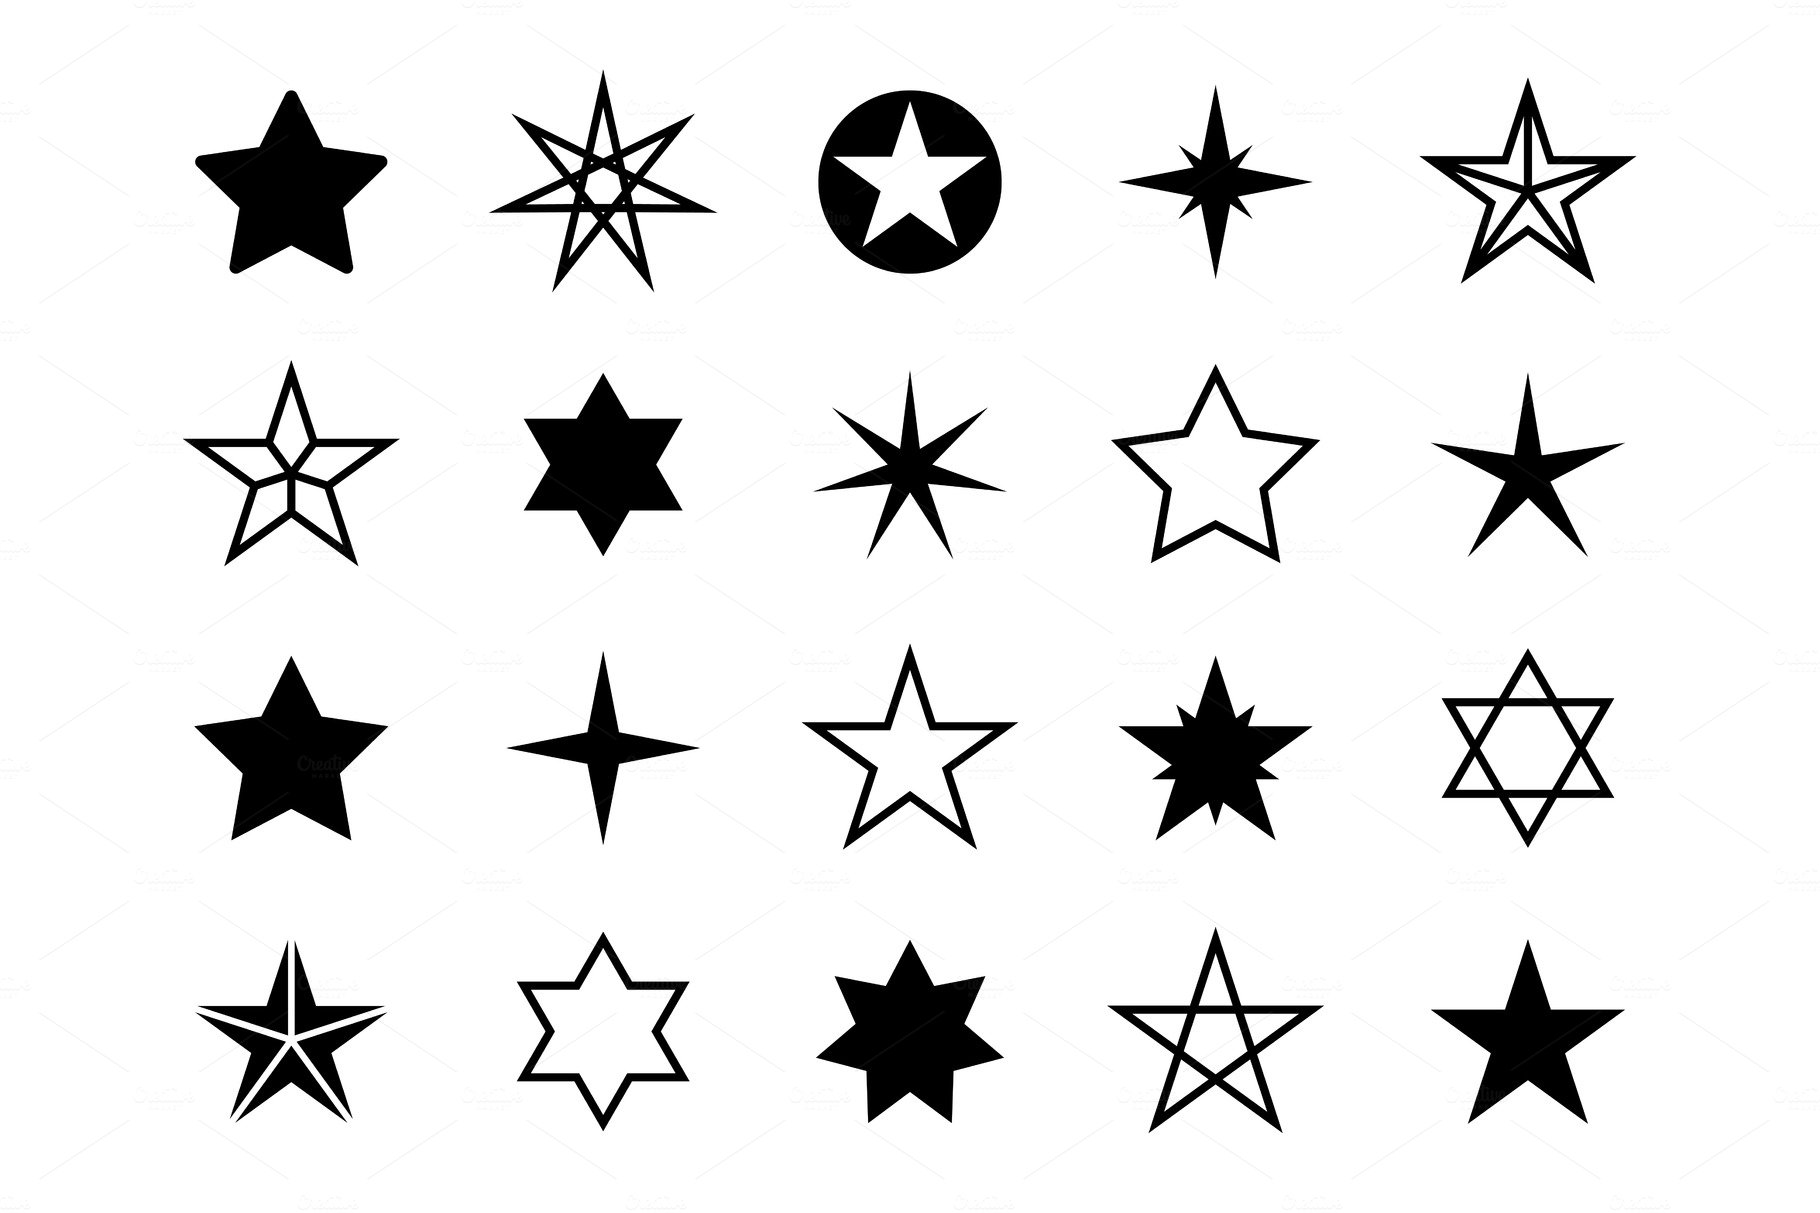 Star shapes set. Different stars cover image.